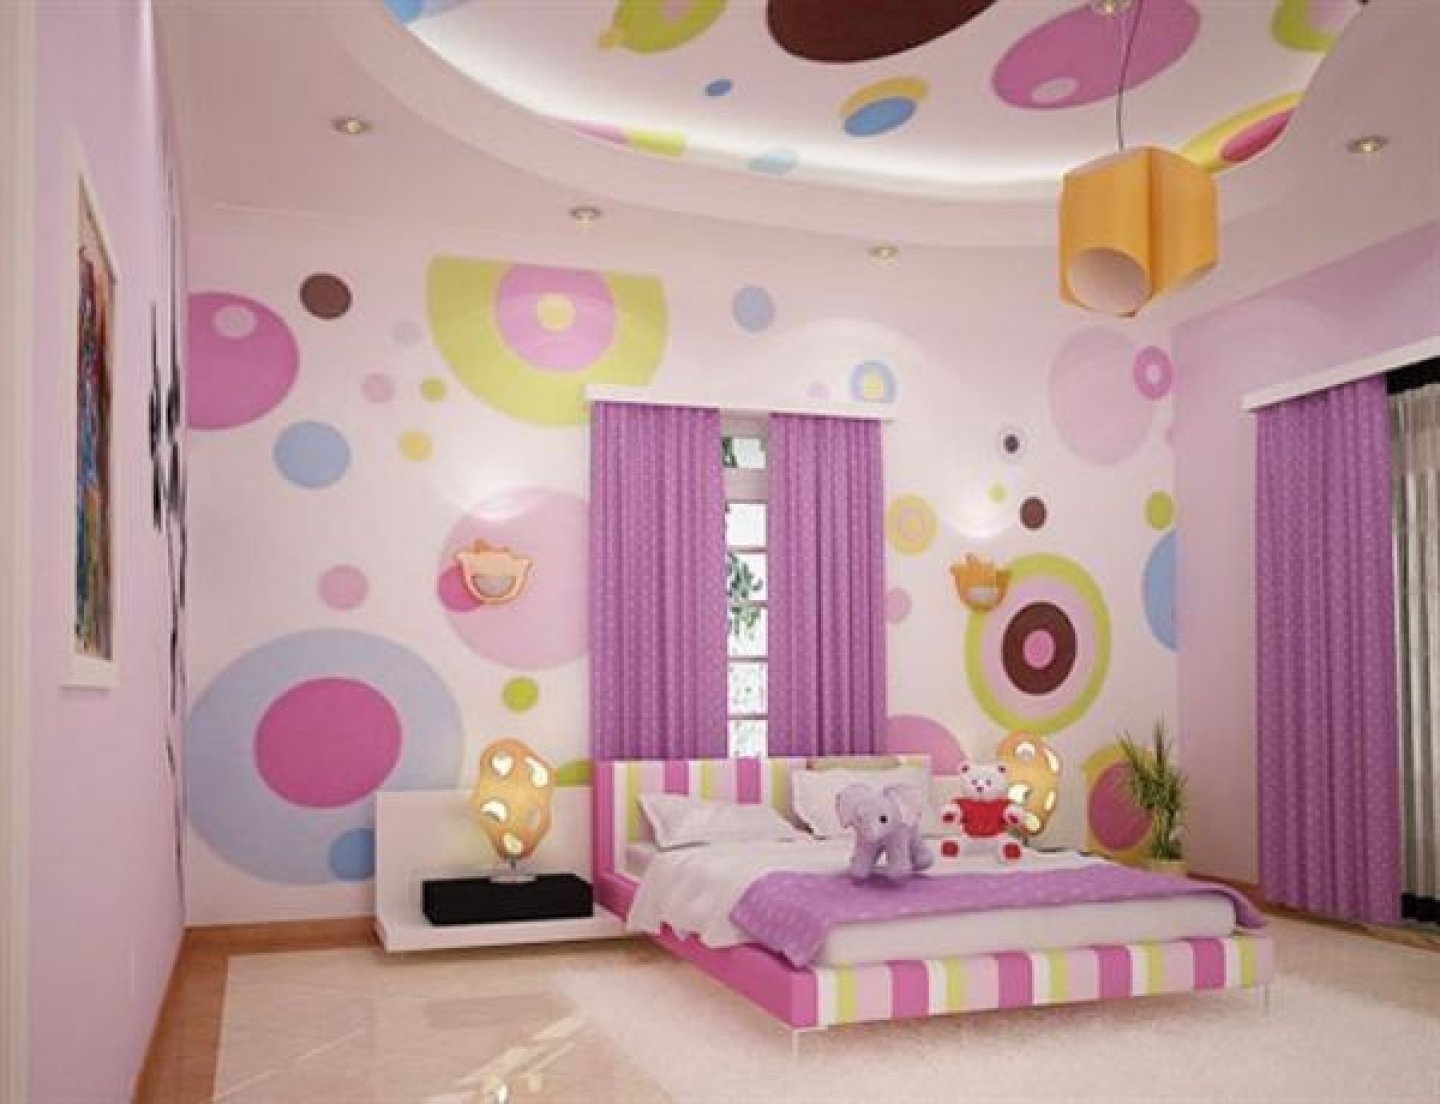 Cool Colorful Square Pattern Wall Colors Theme Girls Bedroom 1 